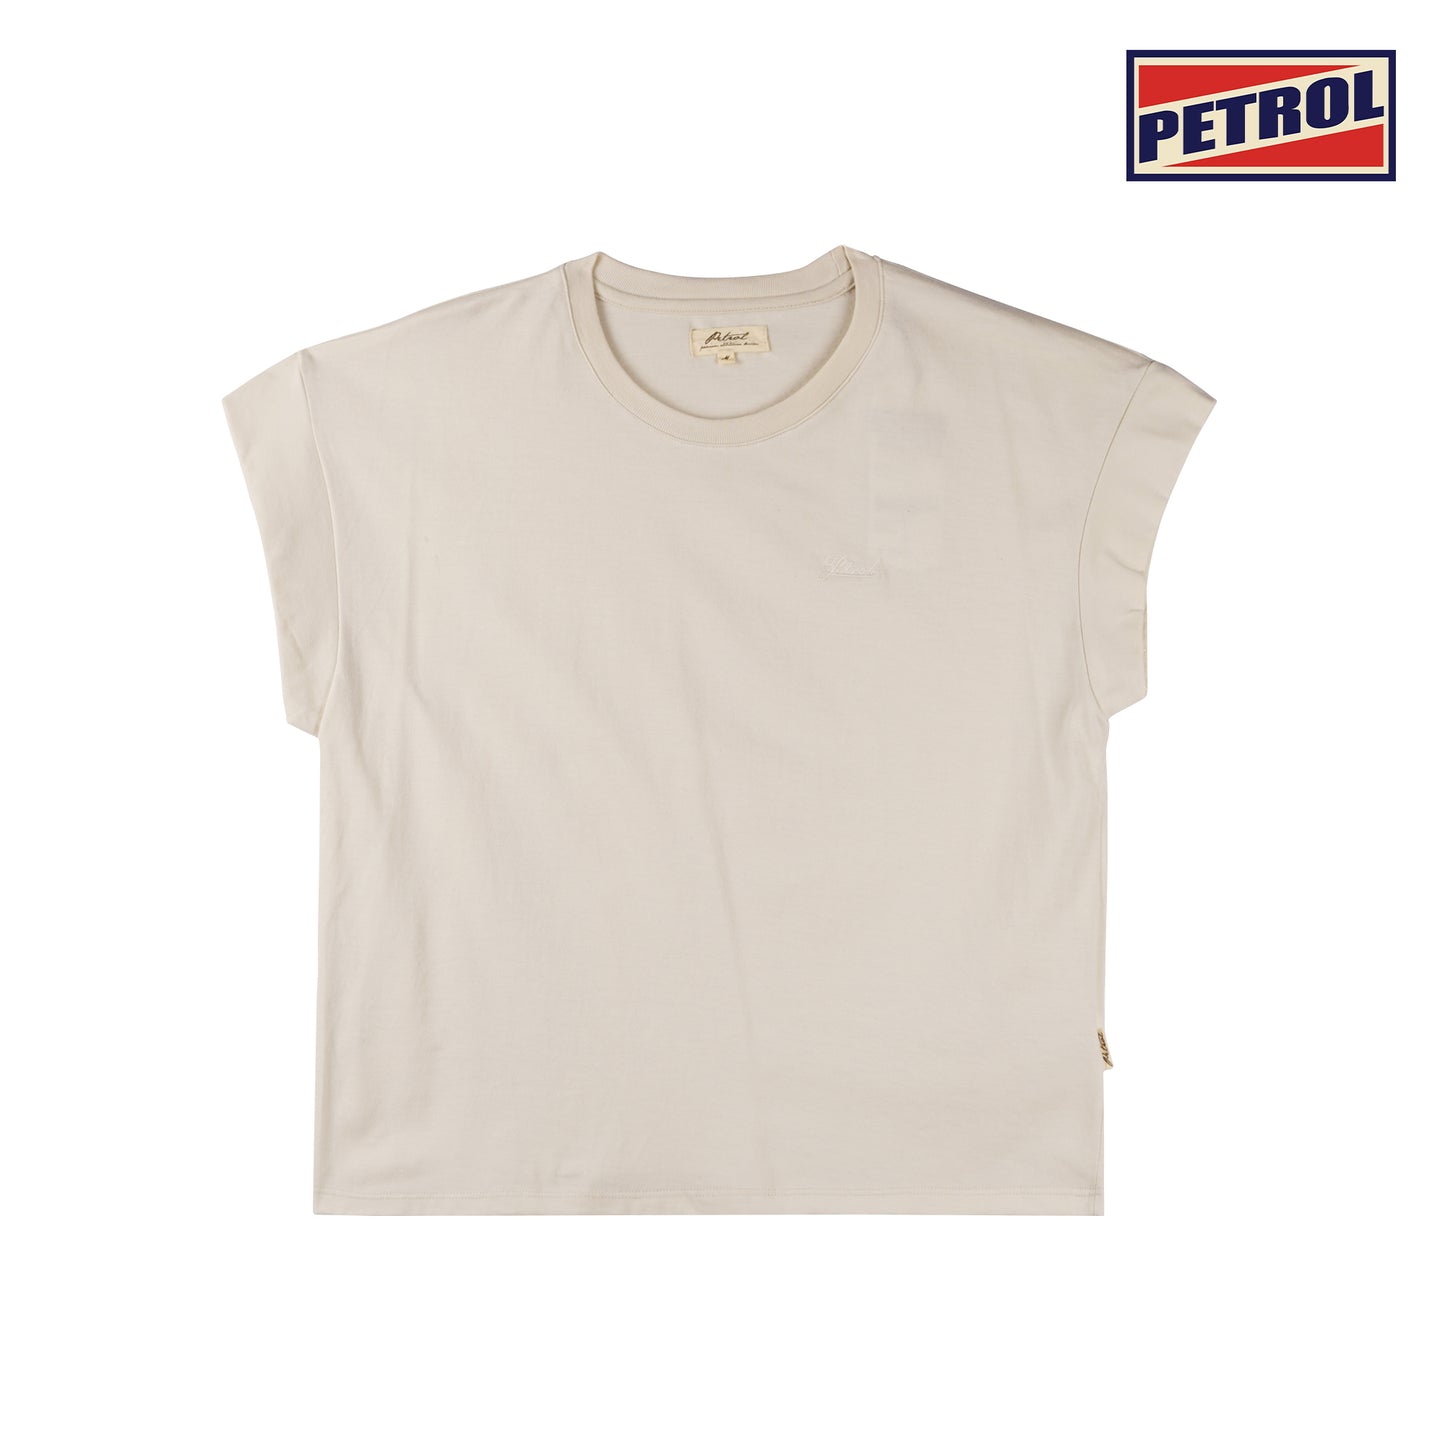 Petrol Basic Tees for Ladies Relaxed Fitting Shirt Trendy fashion Casual Top for Ladies 150163-U (Beige)